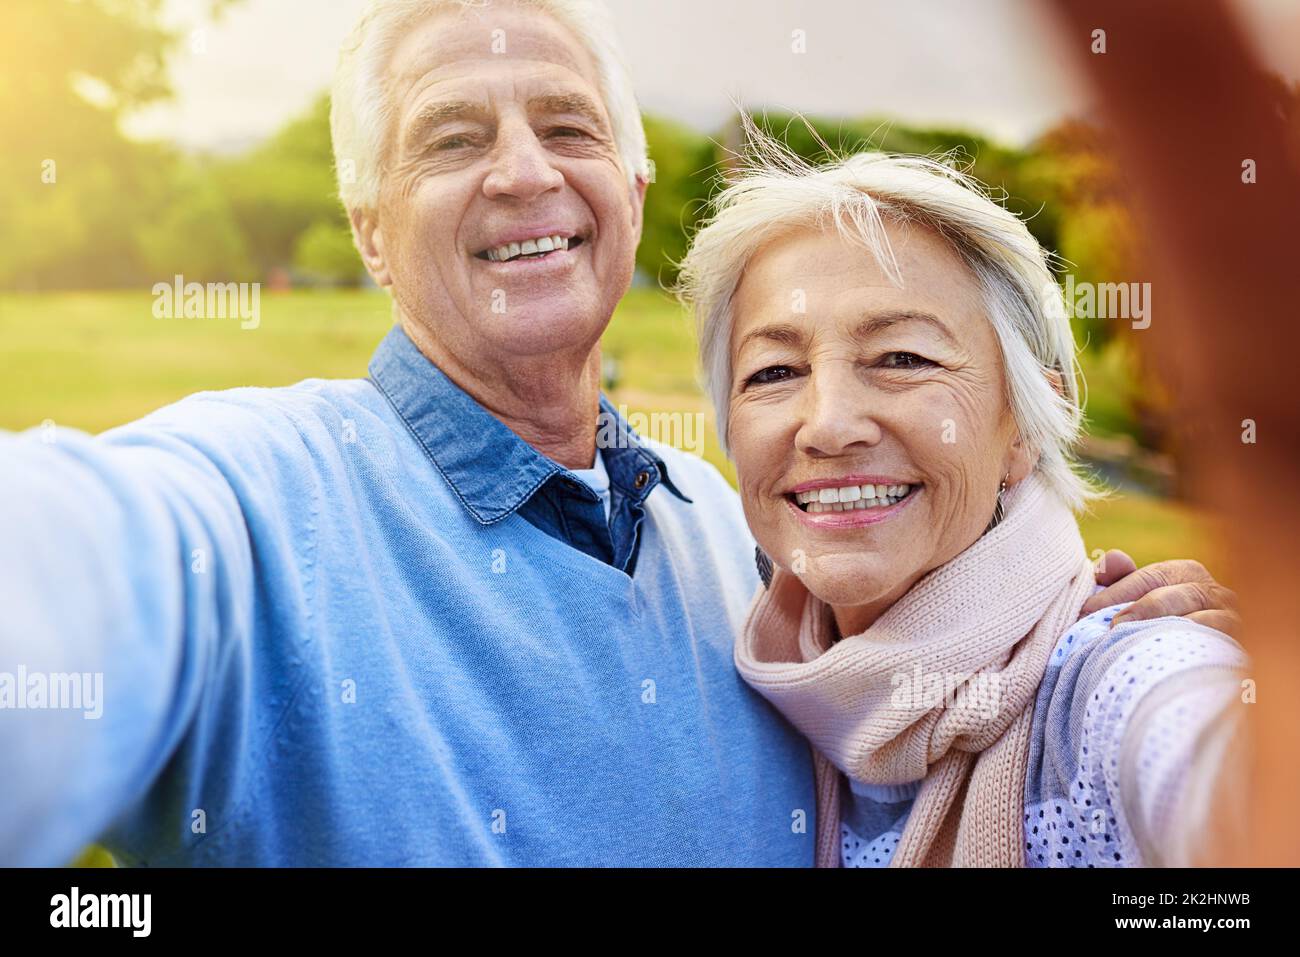 Smile for the camera. Portrait of a senior couple taking a photo together in a park. Stock Photo